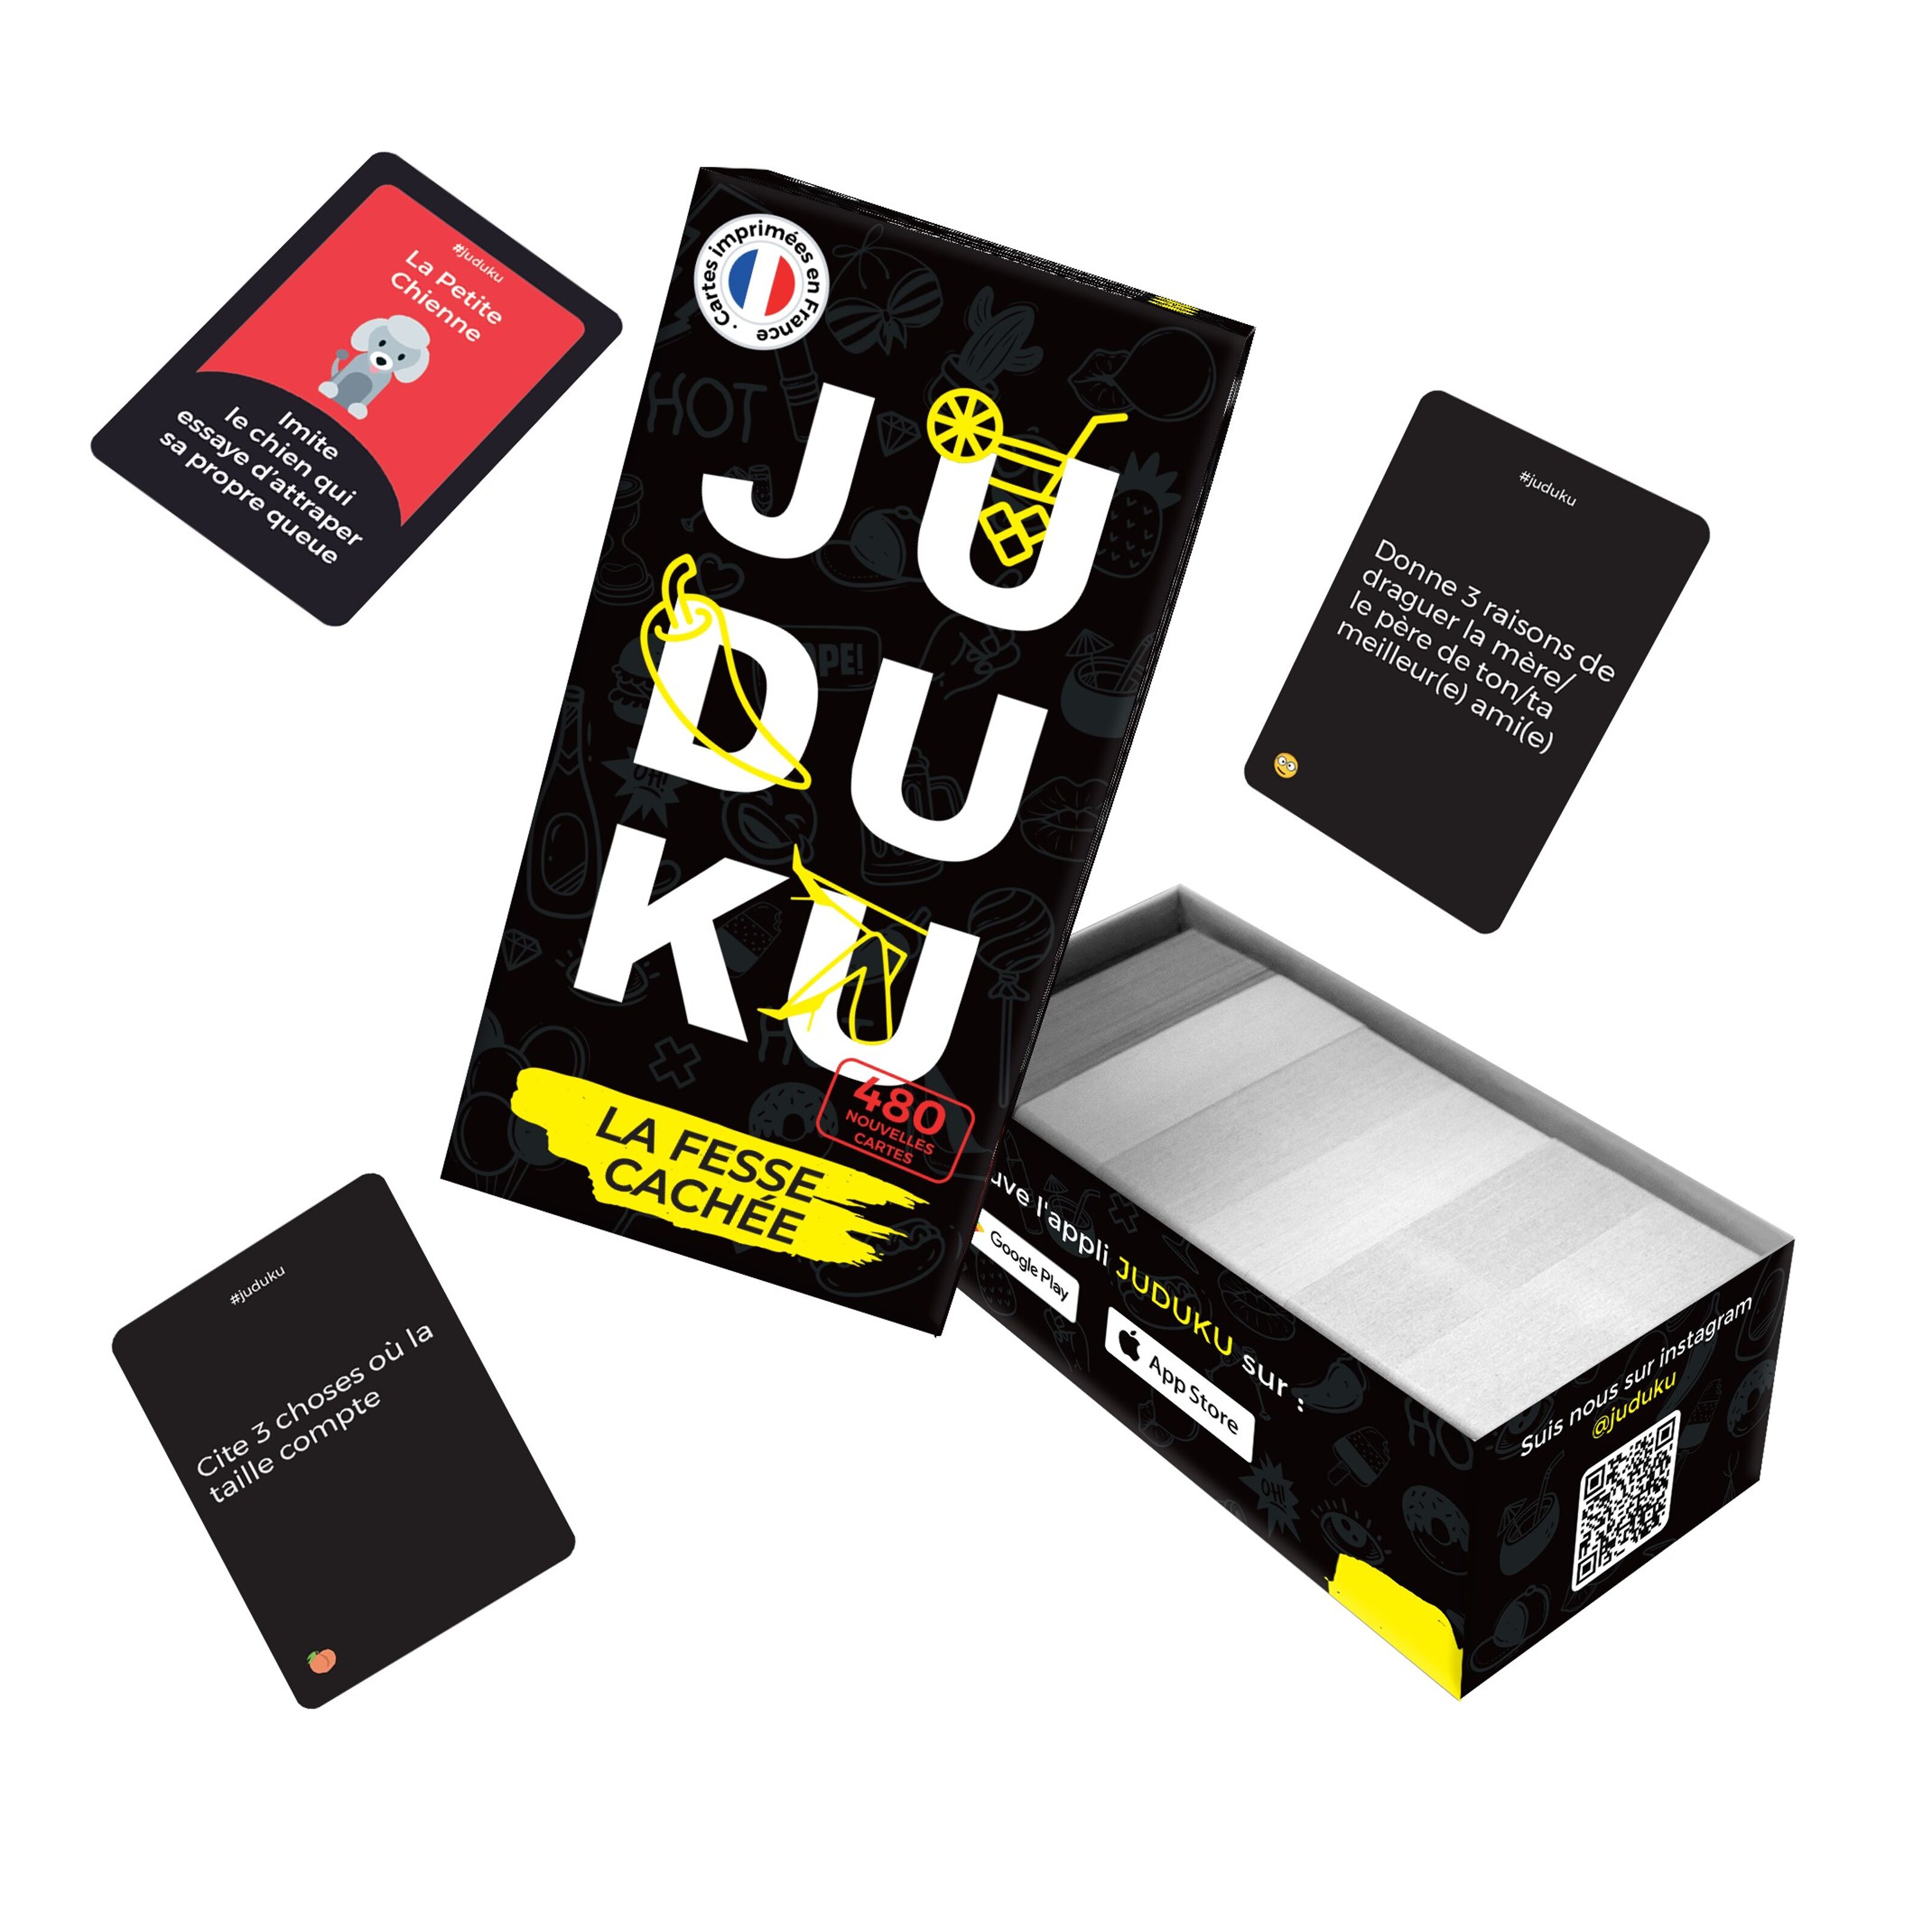 Buy wholesale Juduku - The Hidden Buttock - Party Game - Board Game